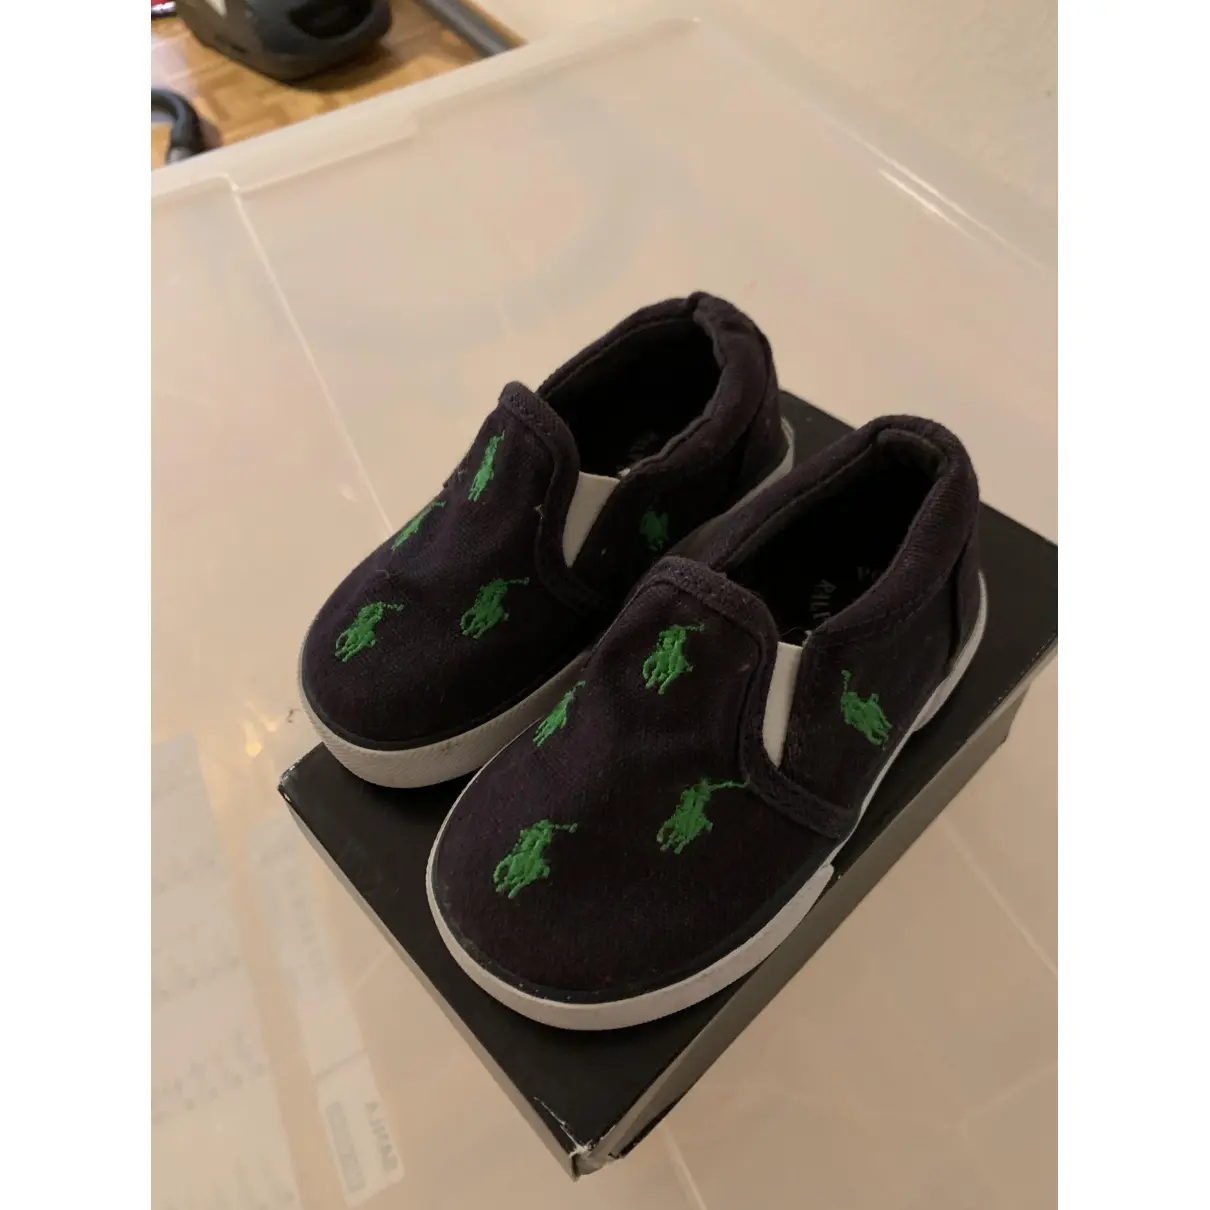 Polo Ralph Lauren Cloth trainers for sale